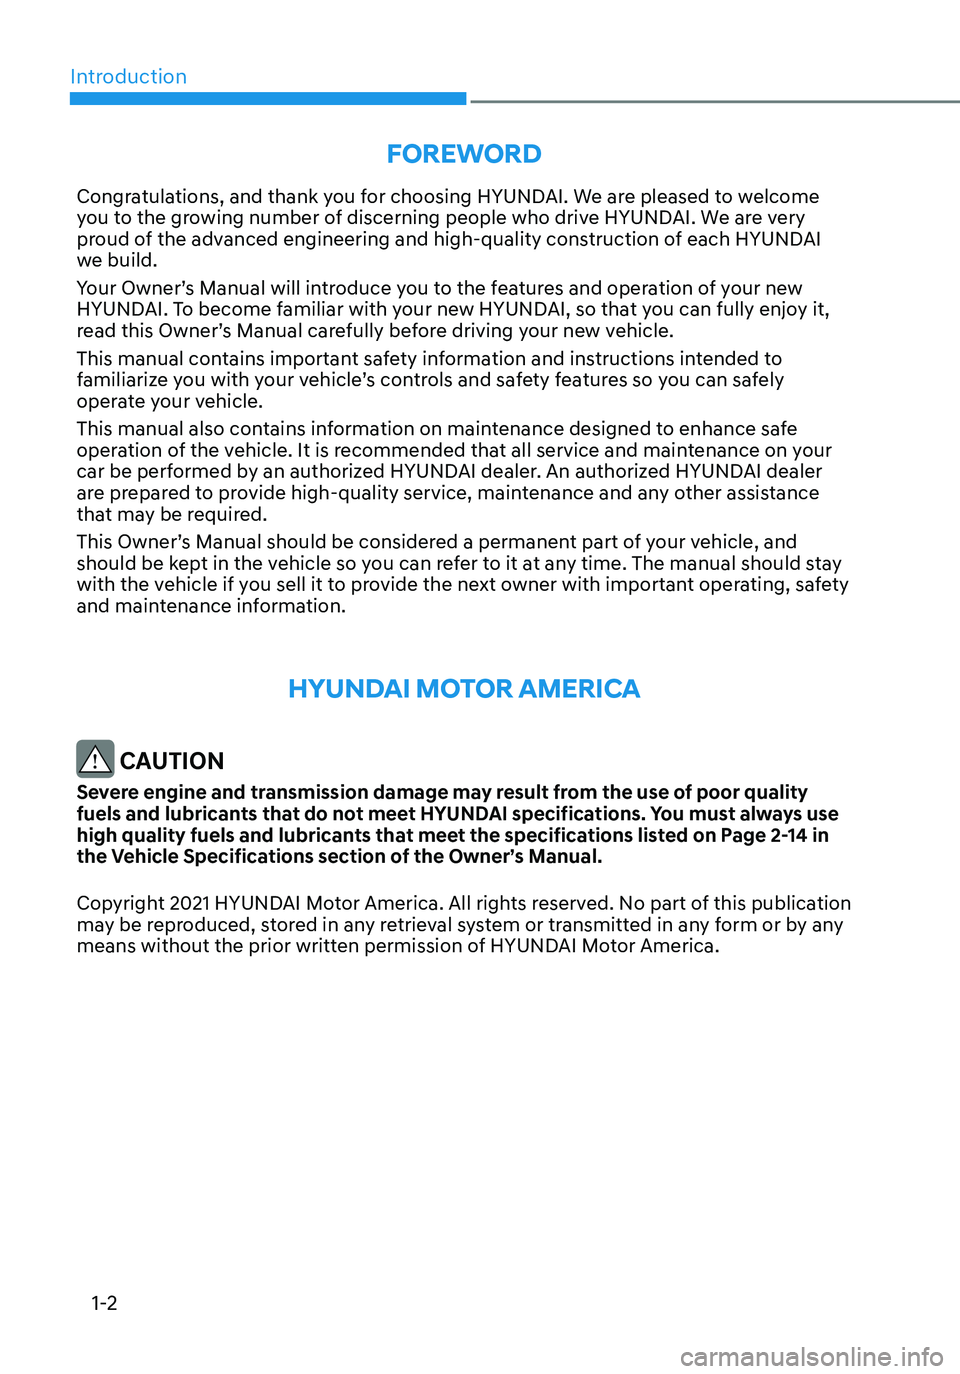 HYUNDAI TUCSON 2022  Owners Manual Introduction
1-2
FOREWORD
Congratulations, and thank you for choosing HYUNDAI. We are pleased to welcome 
you to the growing number of discerning people who drive HYUNDAI. We are very 
proud of the ad